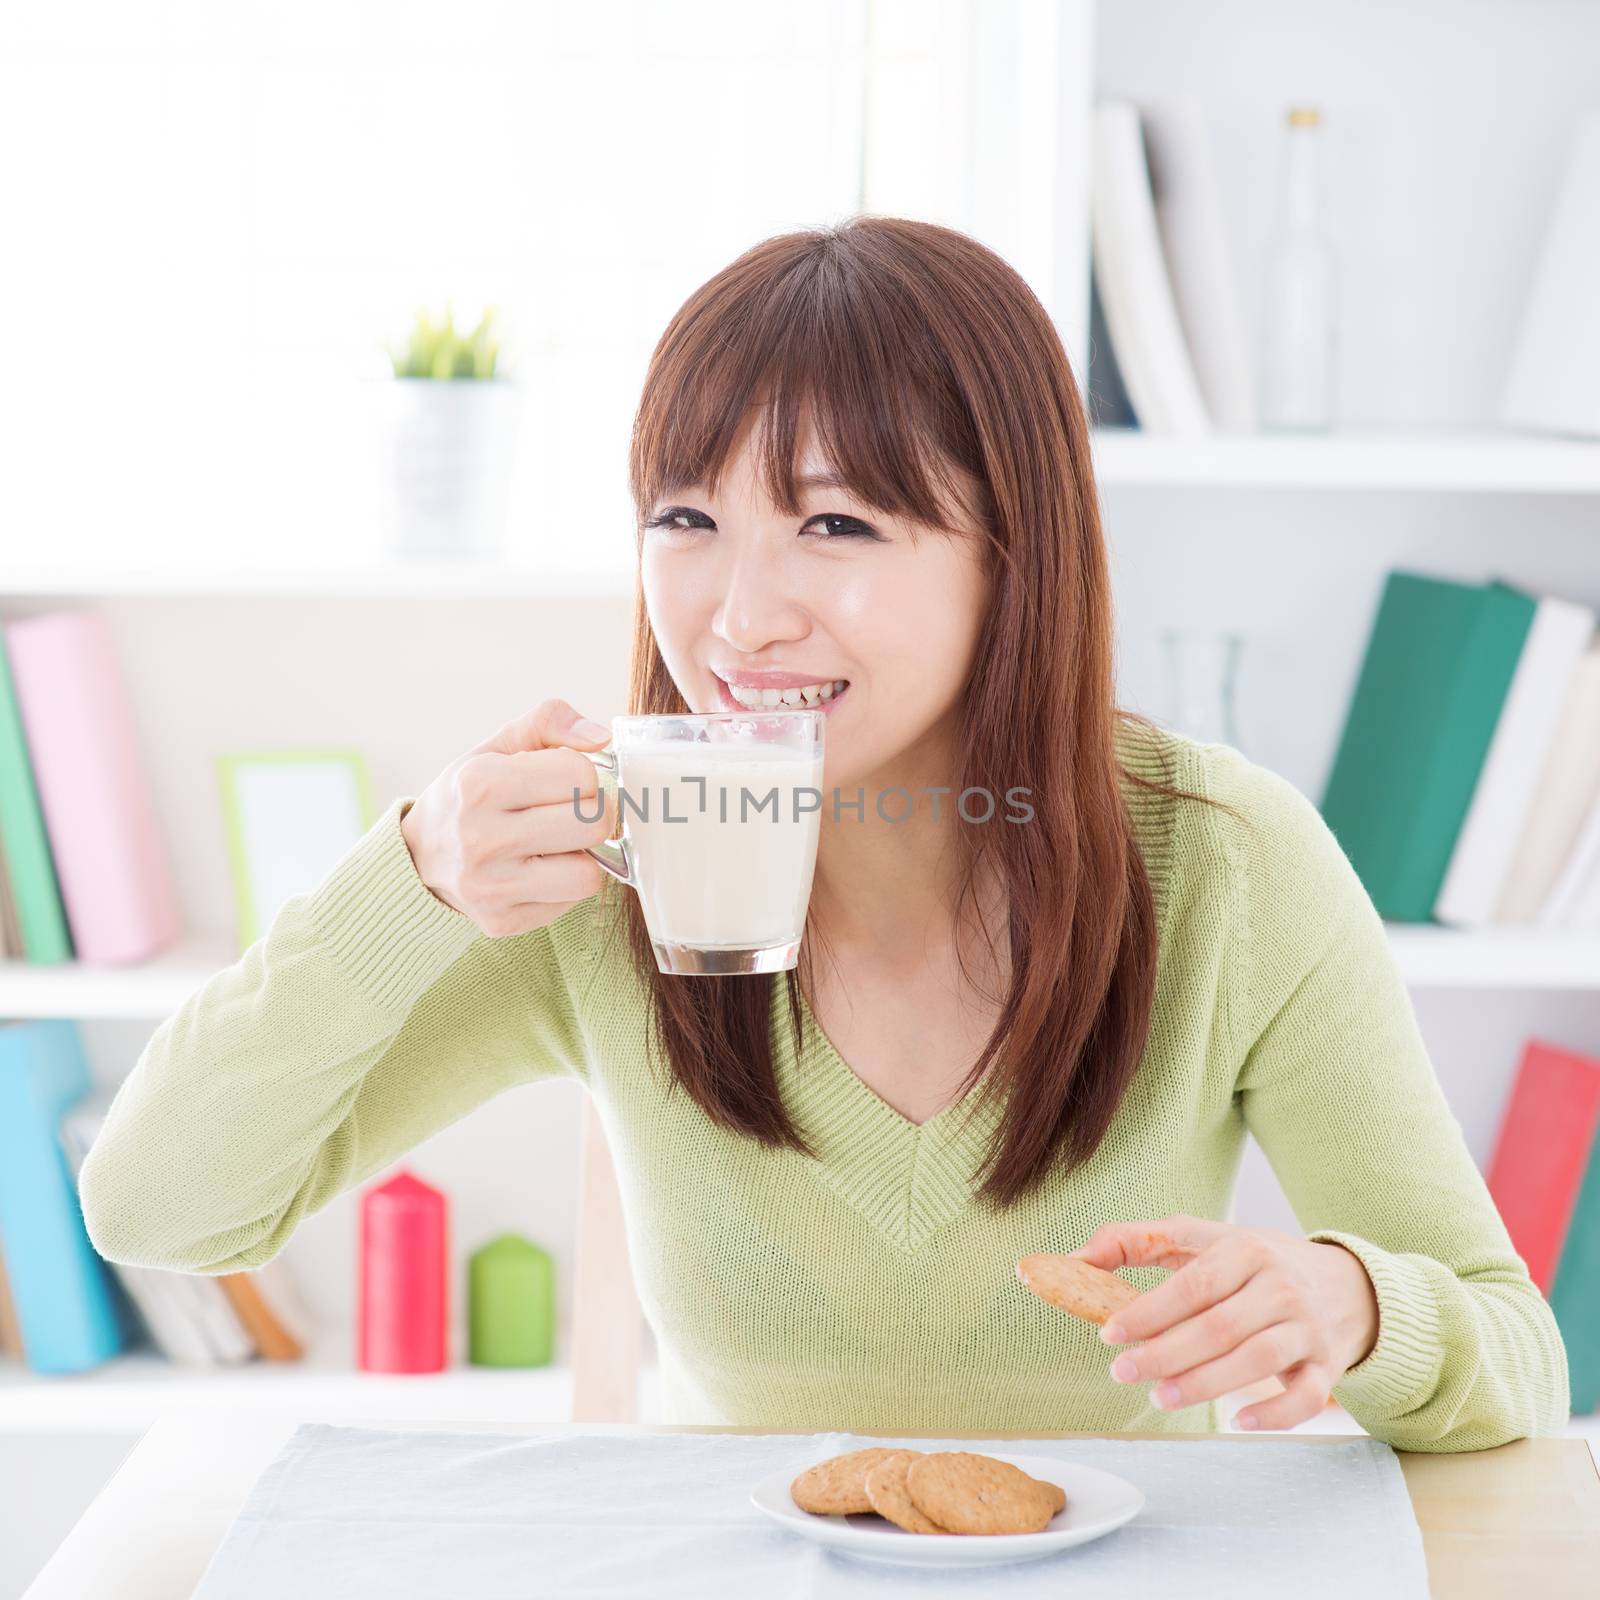 Portrait of happy Asian girl drinking soymilk and having cookies as breakfast. Young woman indoors living lifestyle at home.